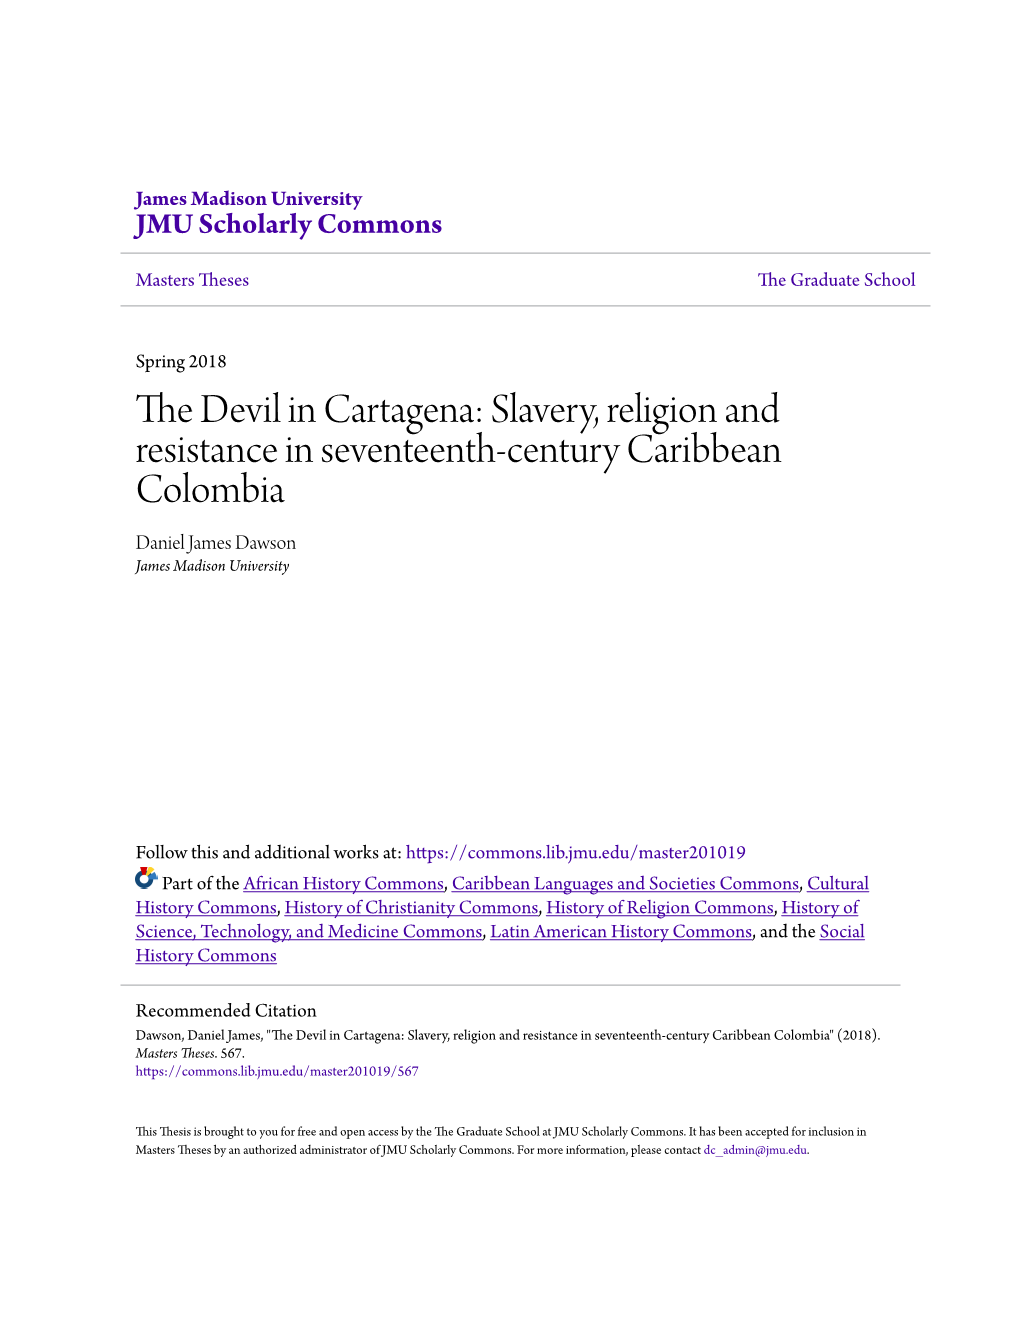 The Devil in Cartagena: Slavery, Religion and Resistance in Seventeenth-Century Caribbean Colombia